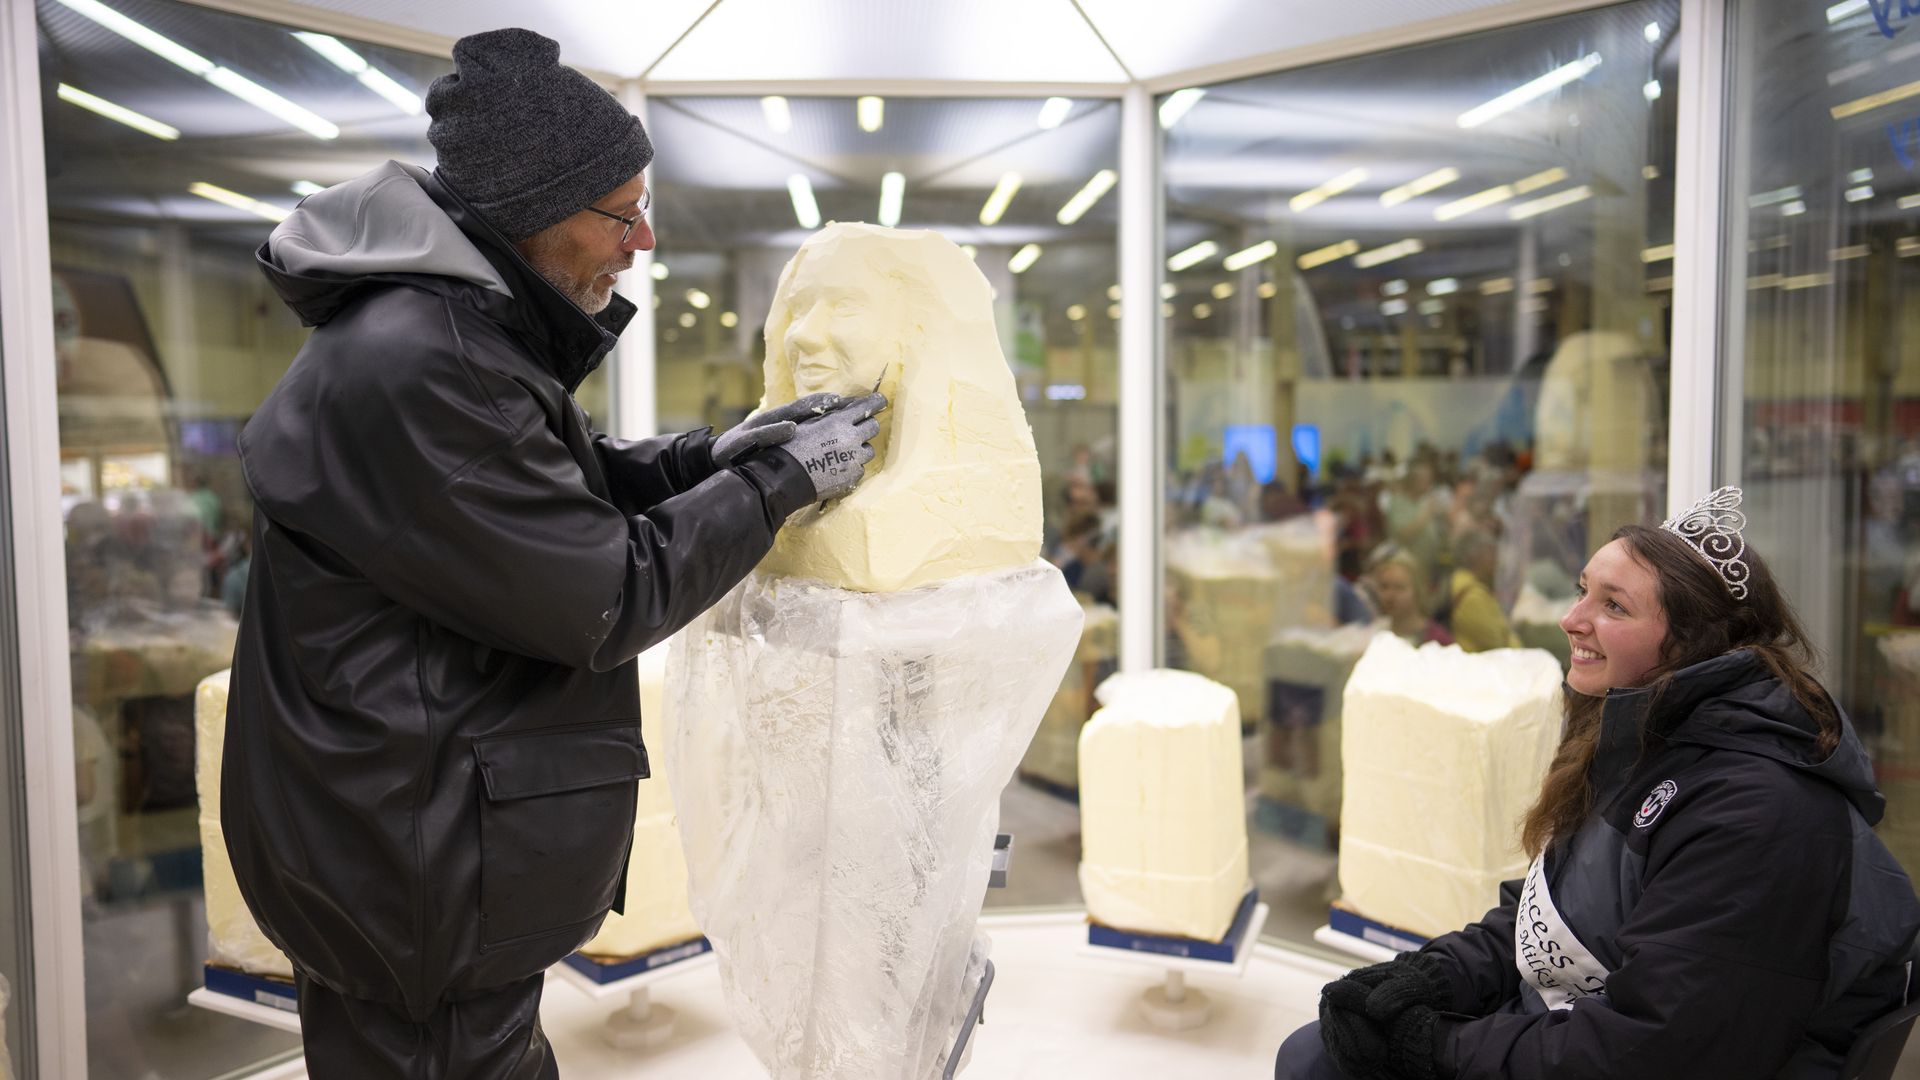 A man carving a large block of butter in the shape of a woman's head.